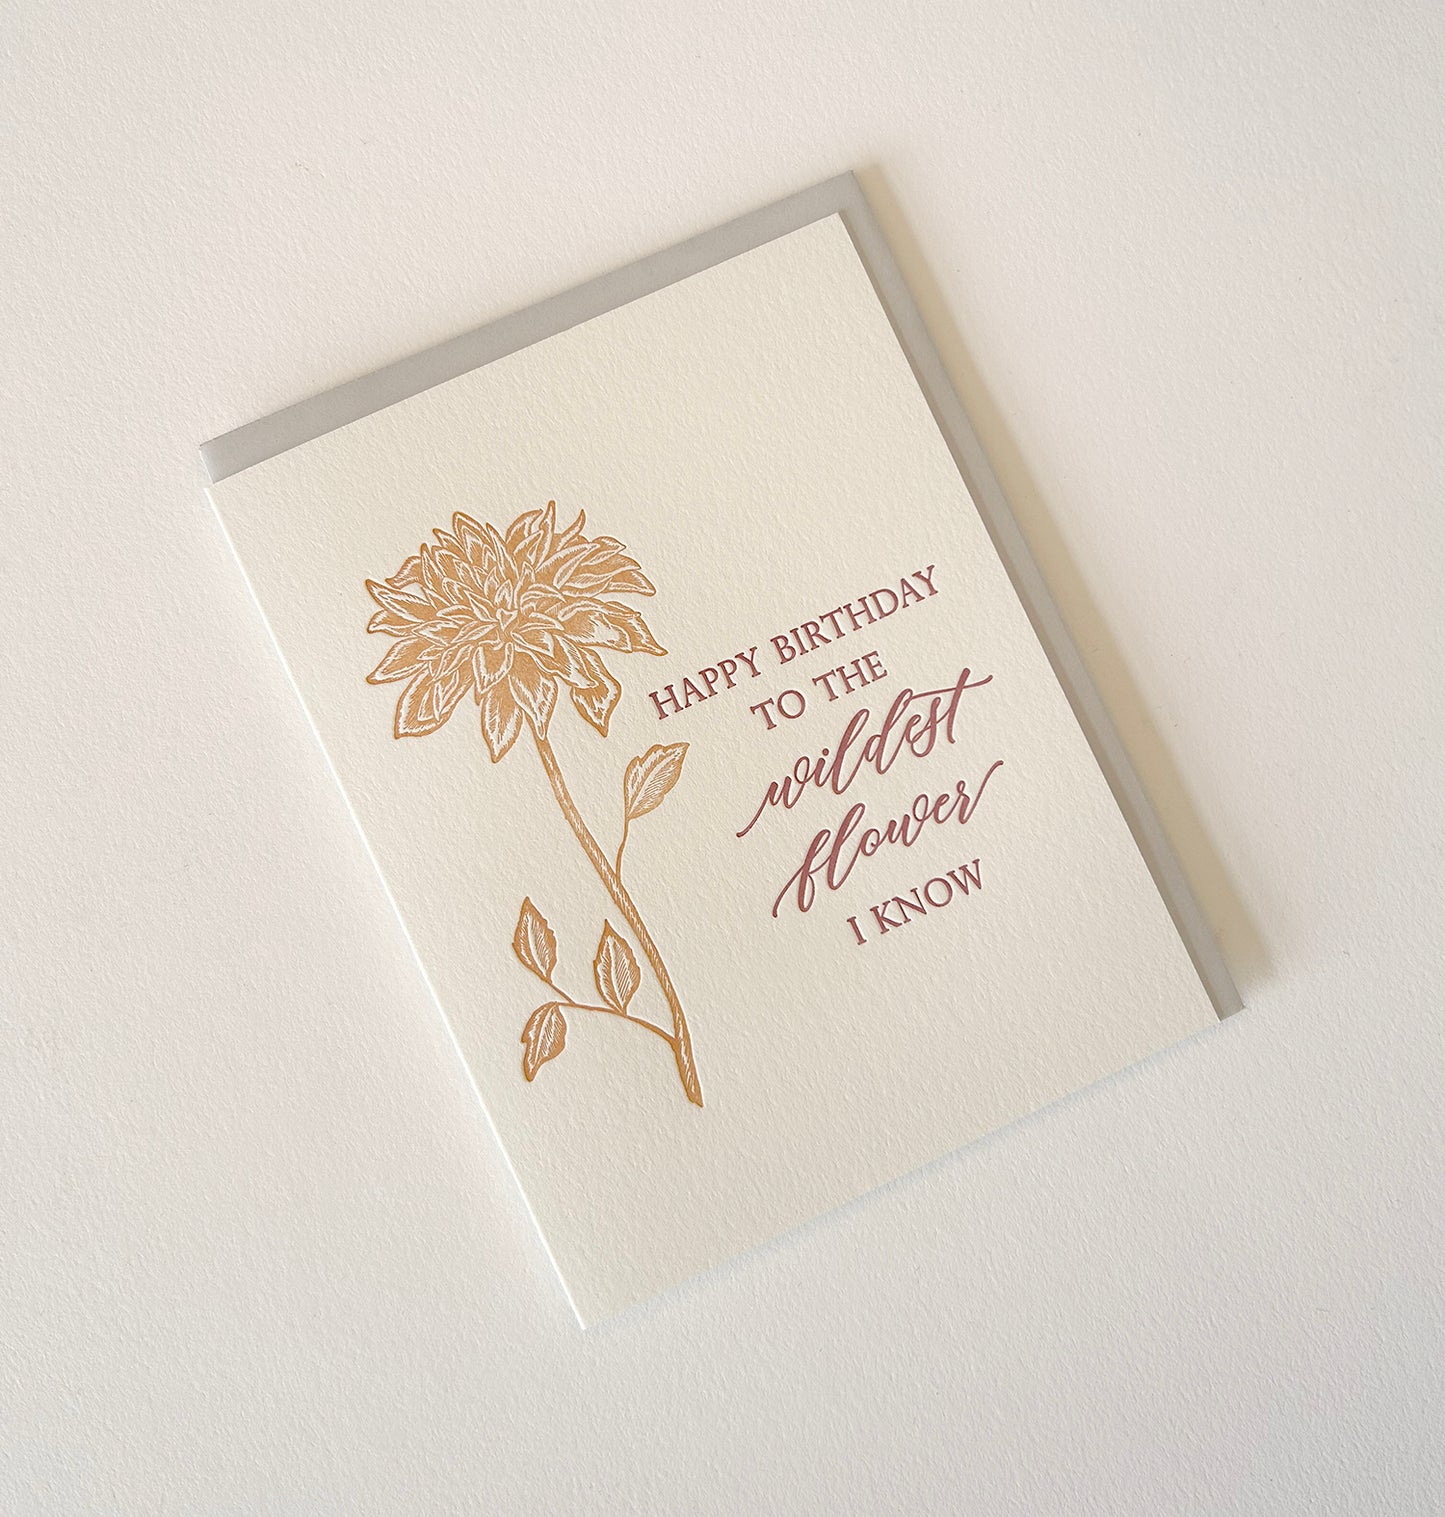 Letterpress birthday card with florals that says "Happy birthday to the wildest flower I know" by Rust Belt Love